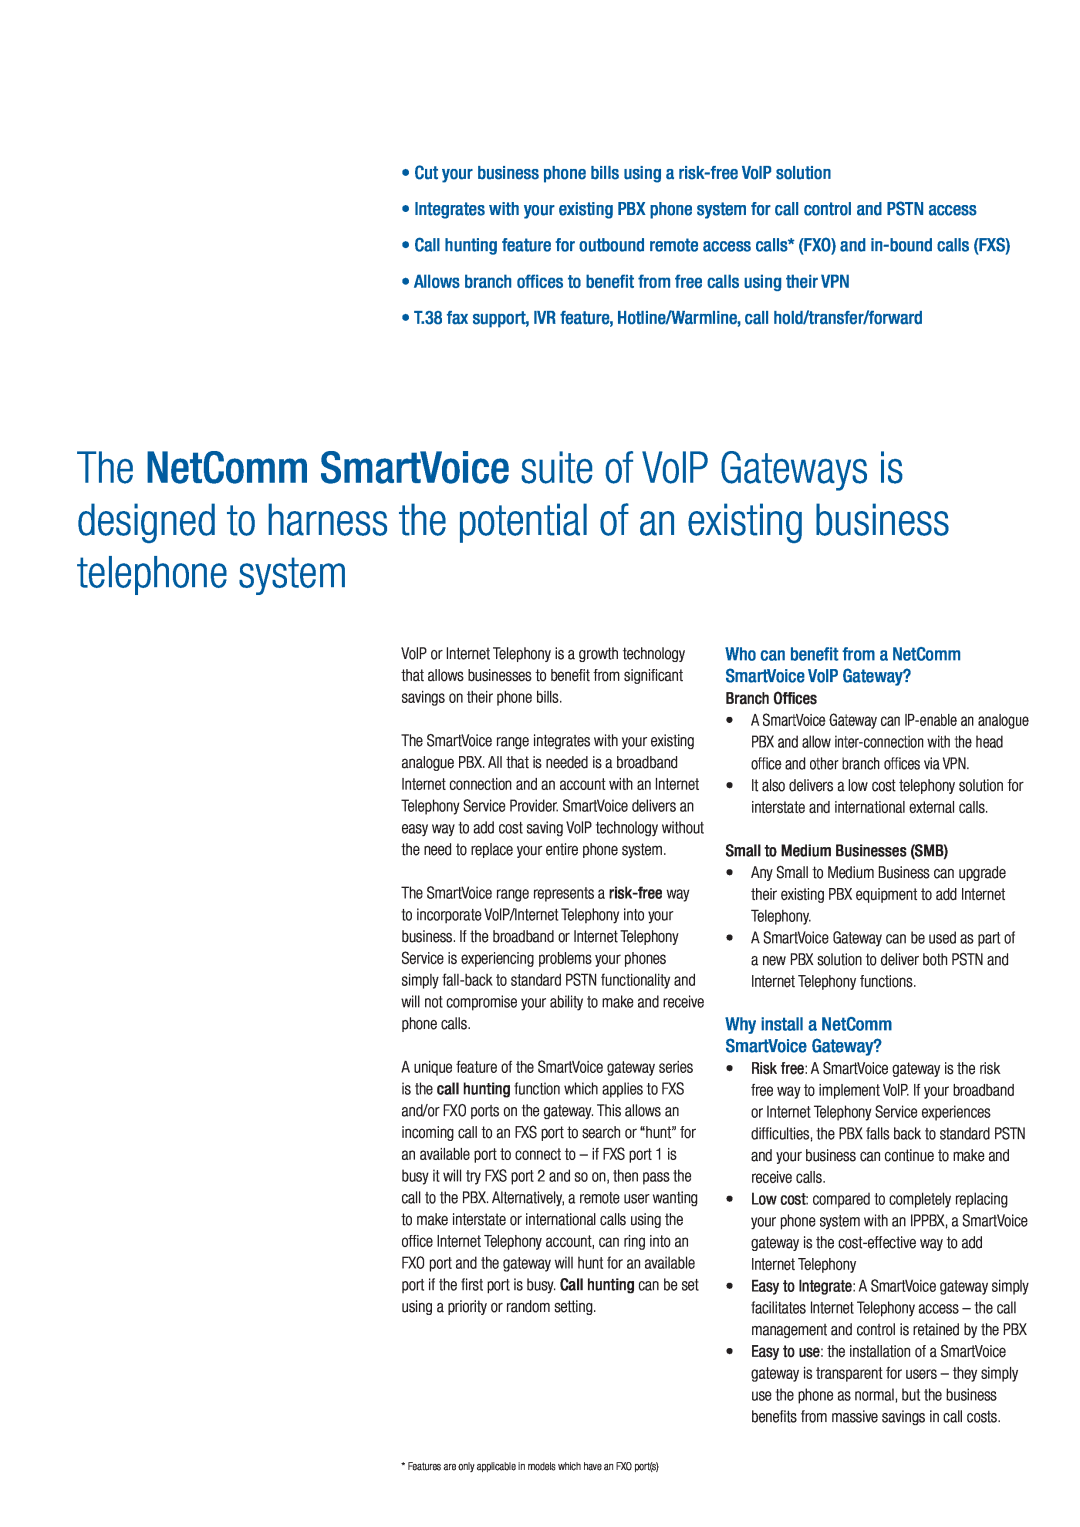 NetComm V800 Cut your business phone bills using a risk-free VoIP solution, Why install a NetComm SmartVoice Gateway? 